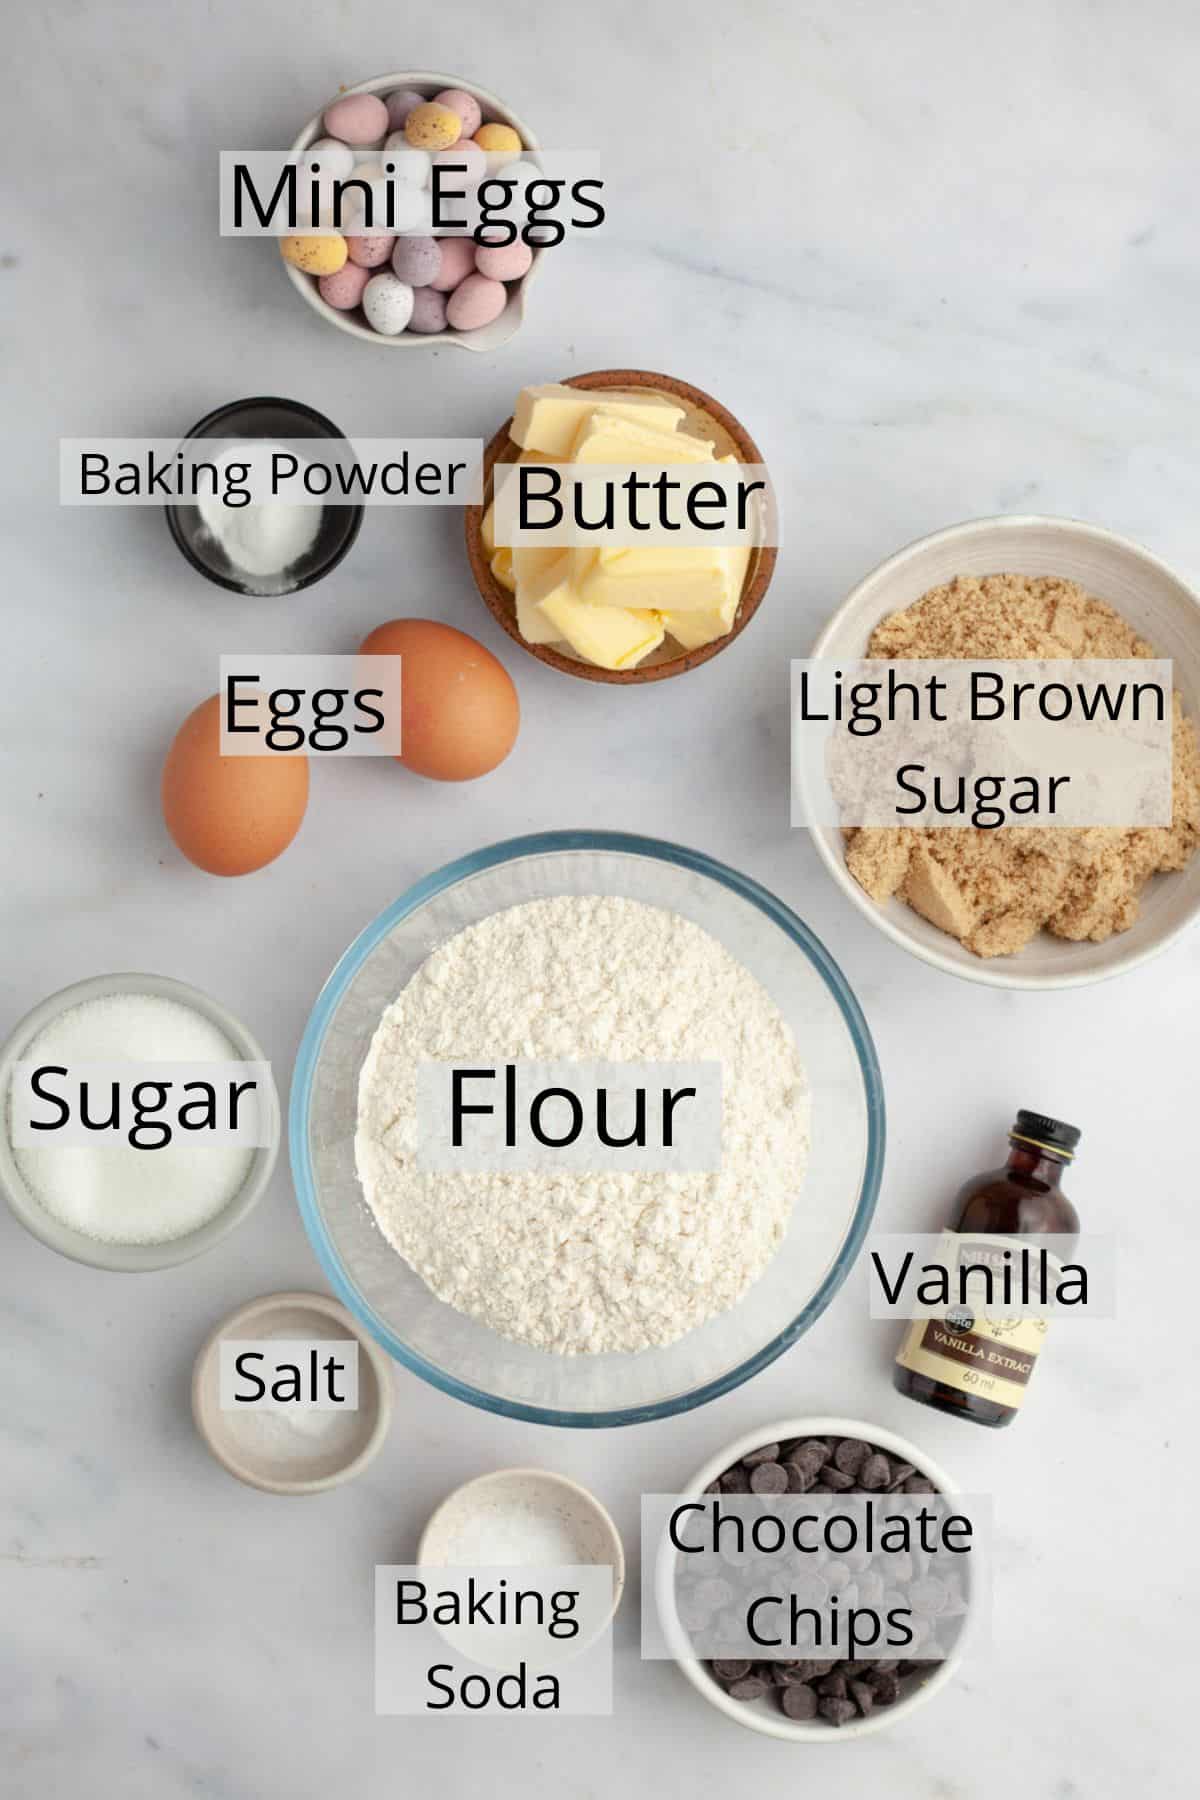 All the ingredients needed to make mini egg cookies weighed out into small bowls.